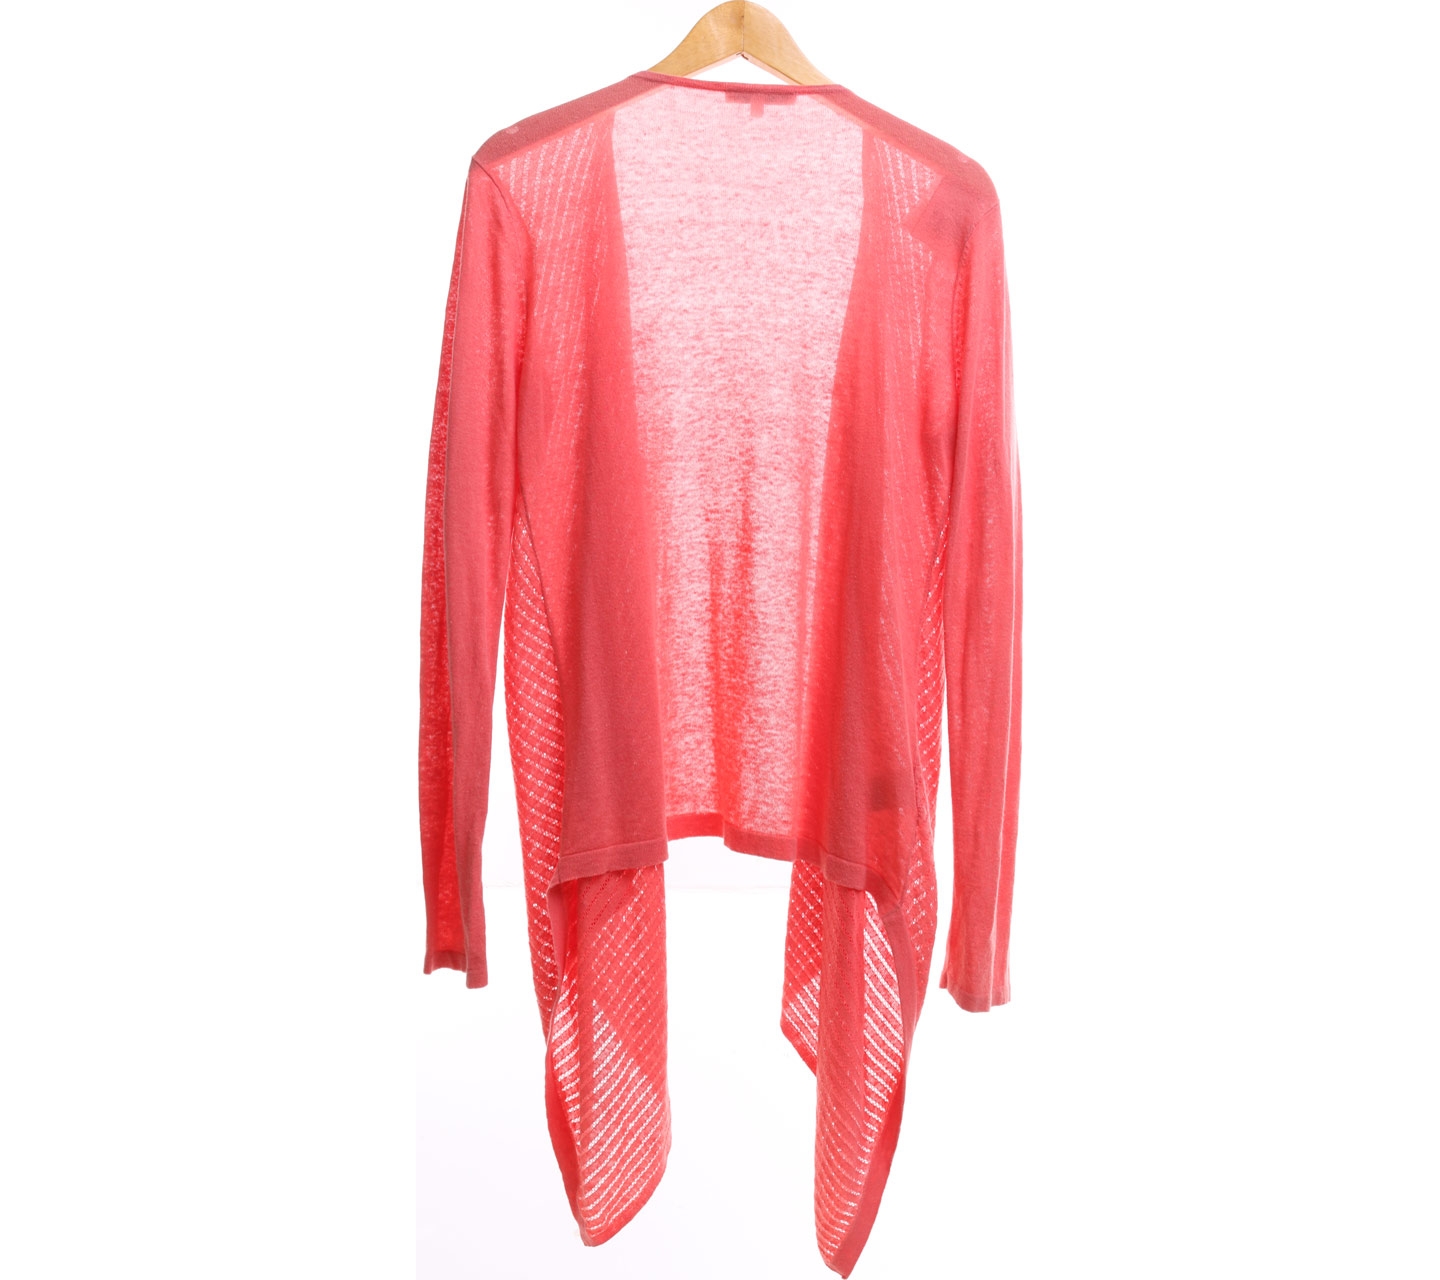 Laura Ashley Pink Coral Outerwear